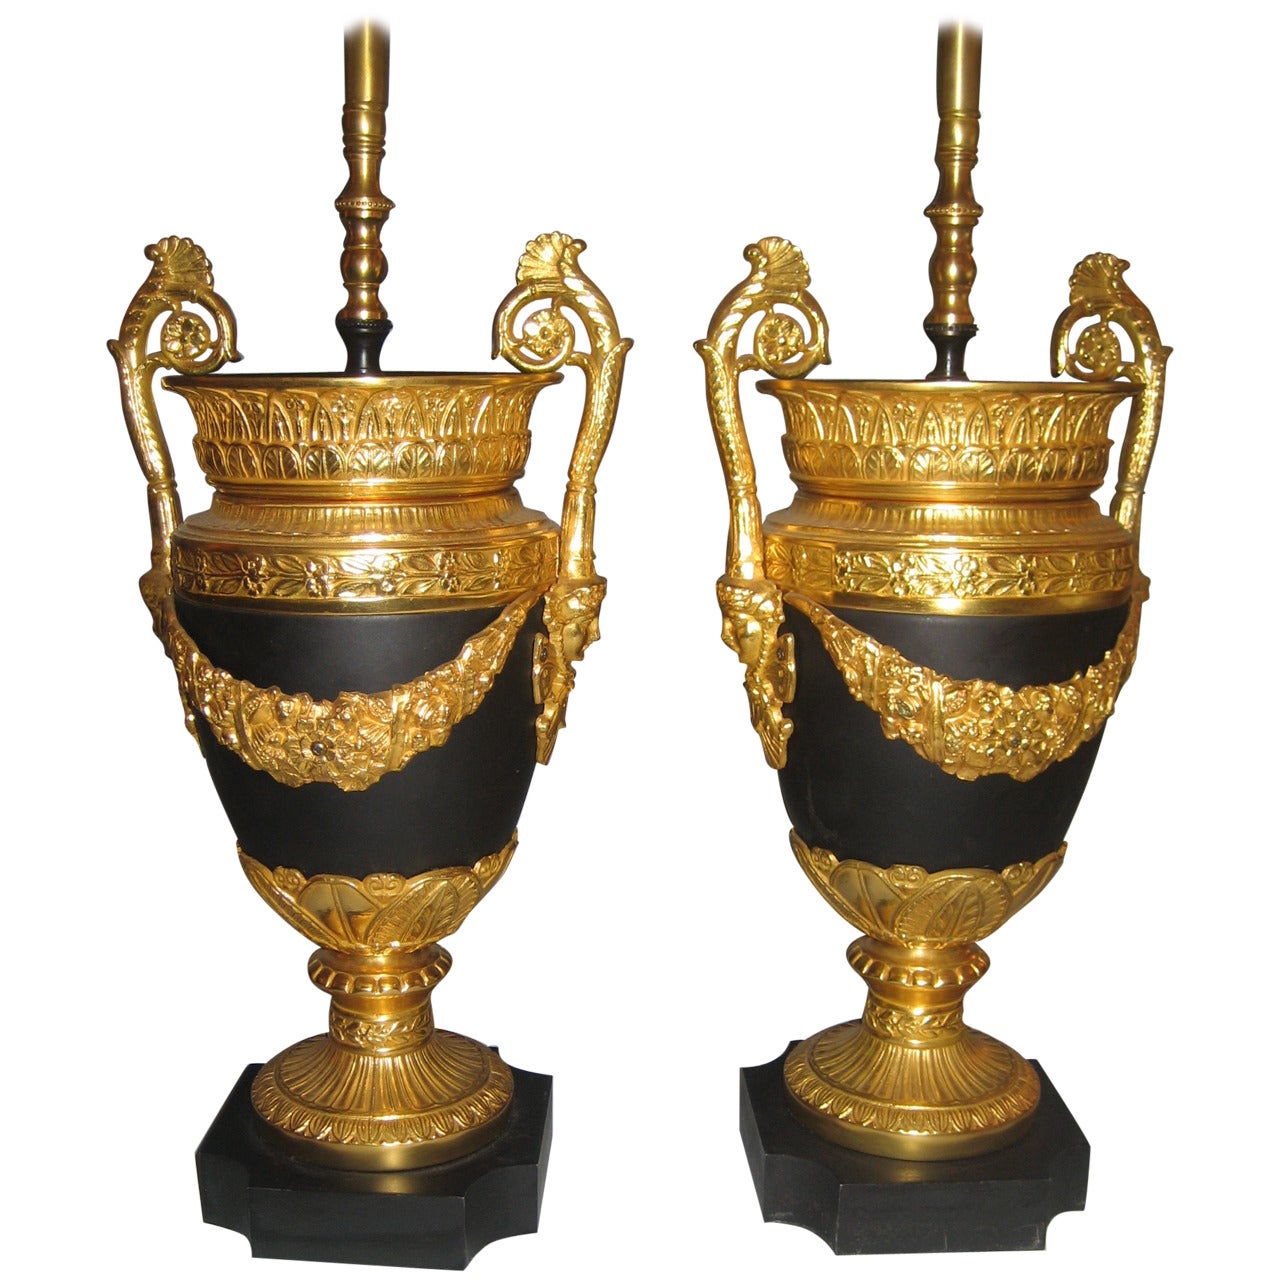 Pair of Antique French Empire Style Gilt Bronze and Patina Bronze Lamps